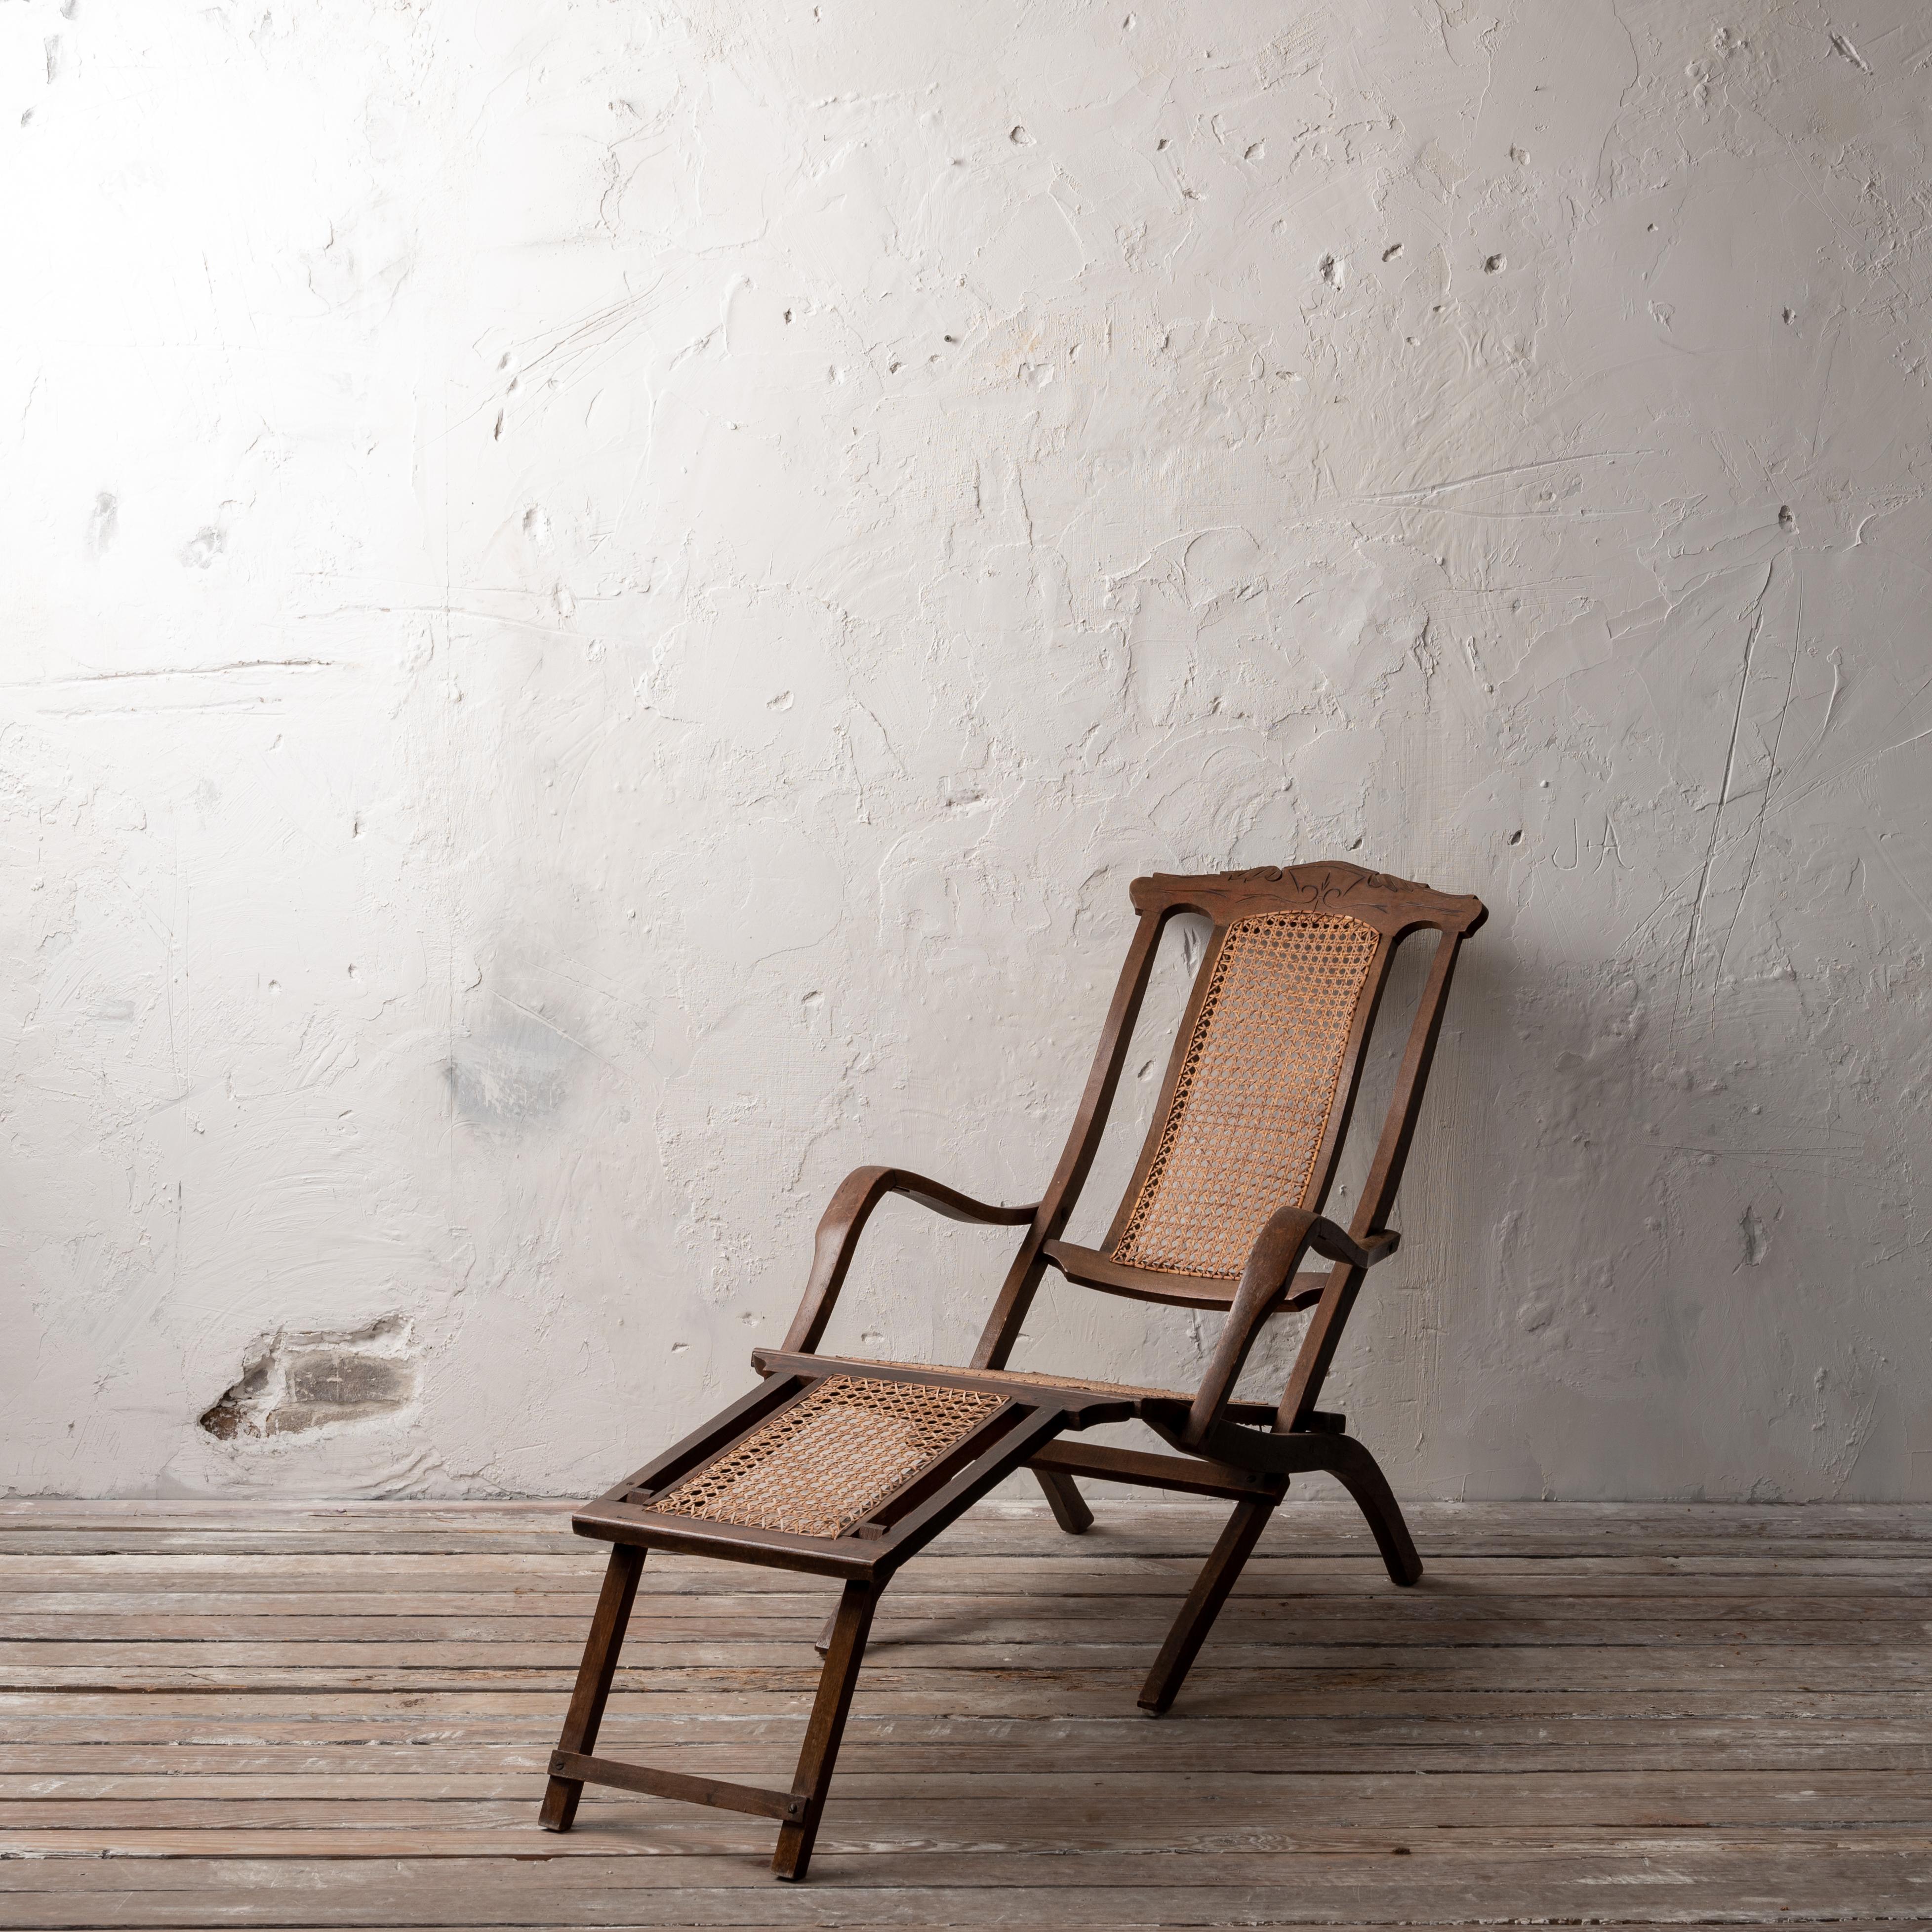 American Steamer Deck Chair, c.1890 For Sale